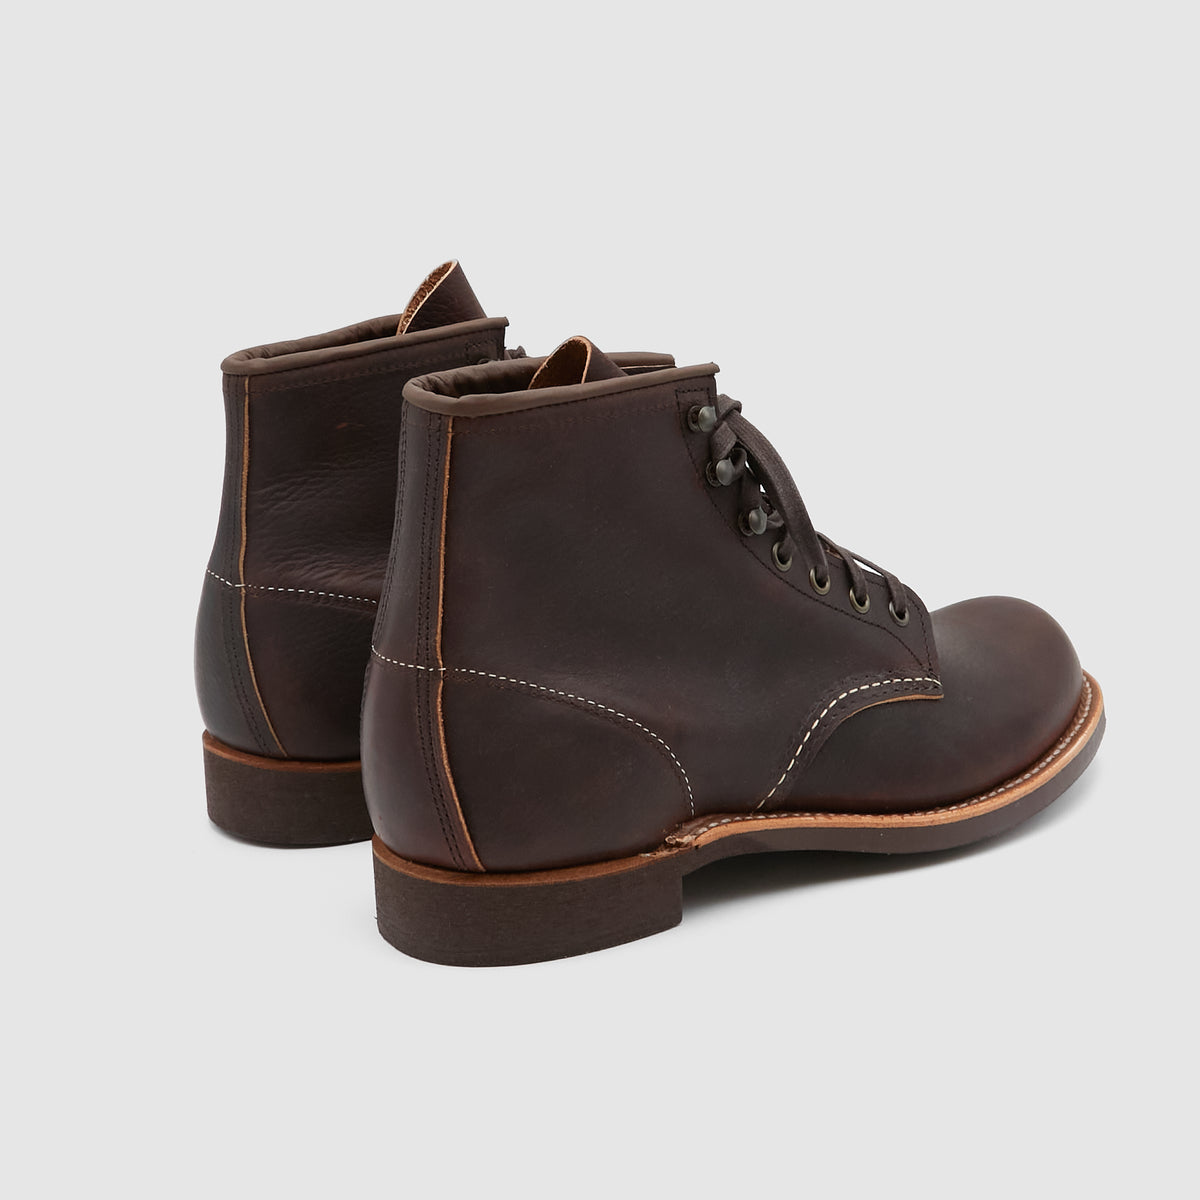 Red Wing Heritage Shoes Blacksmith 3340